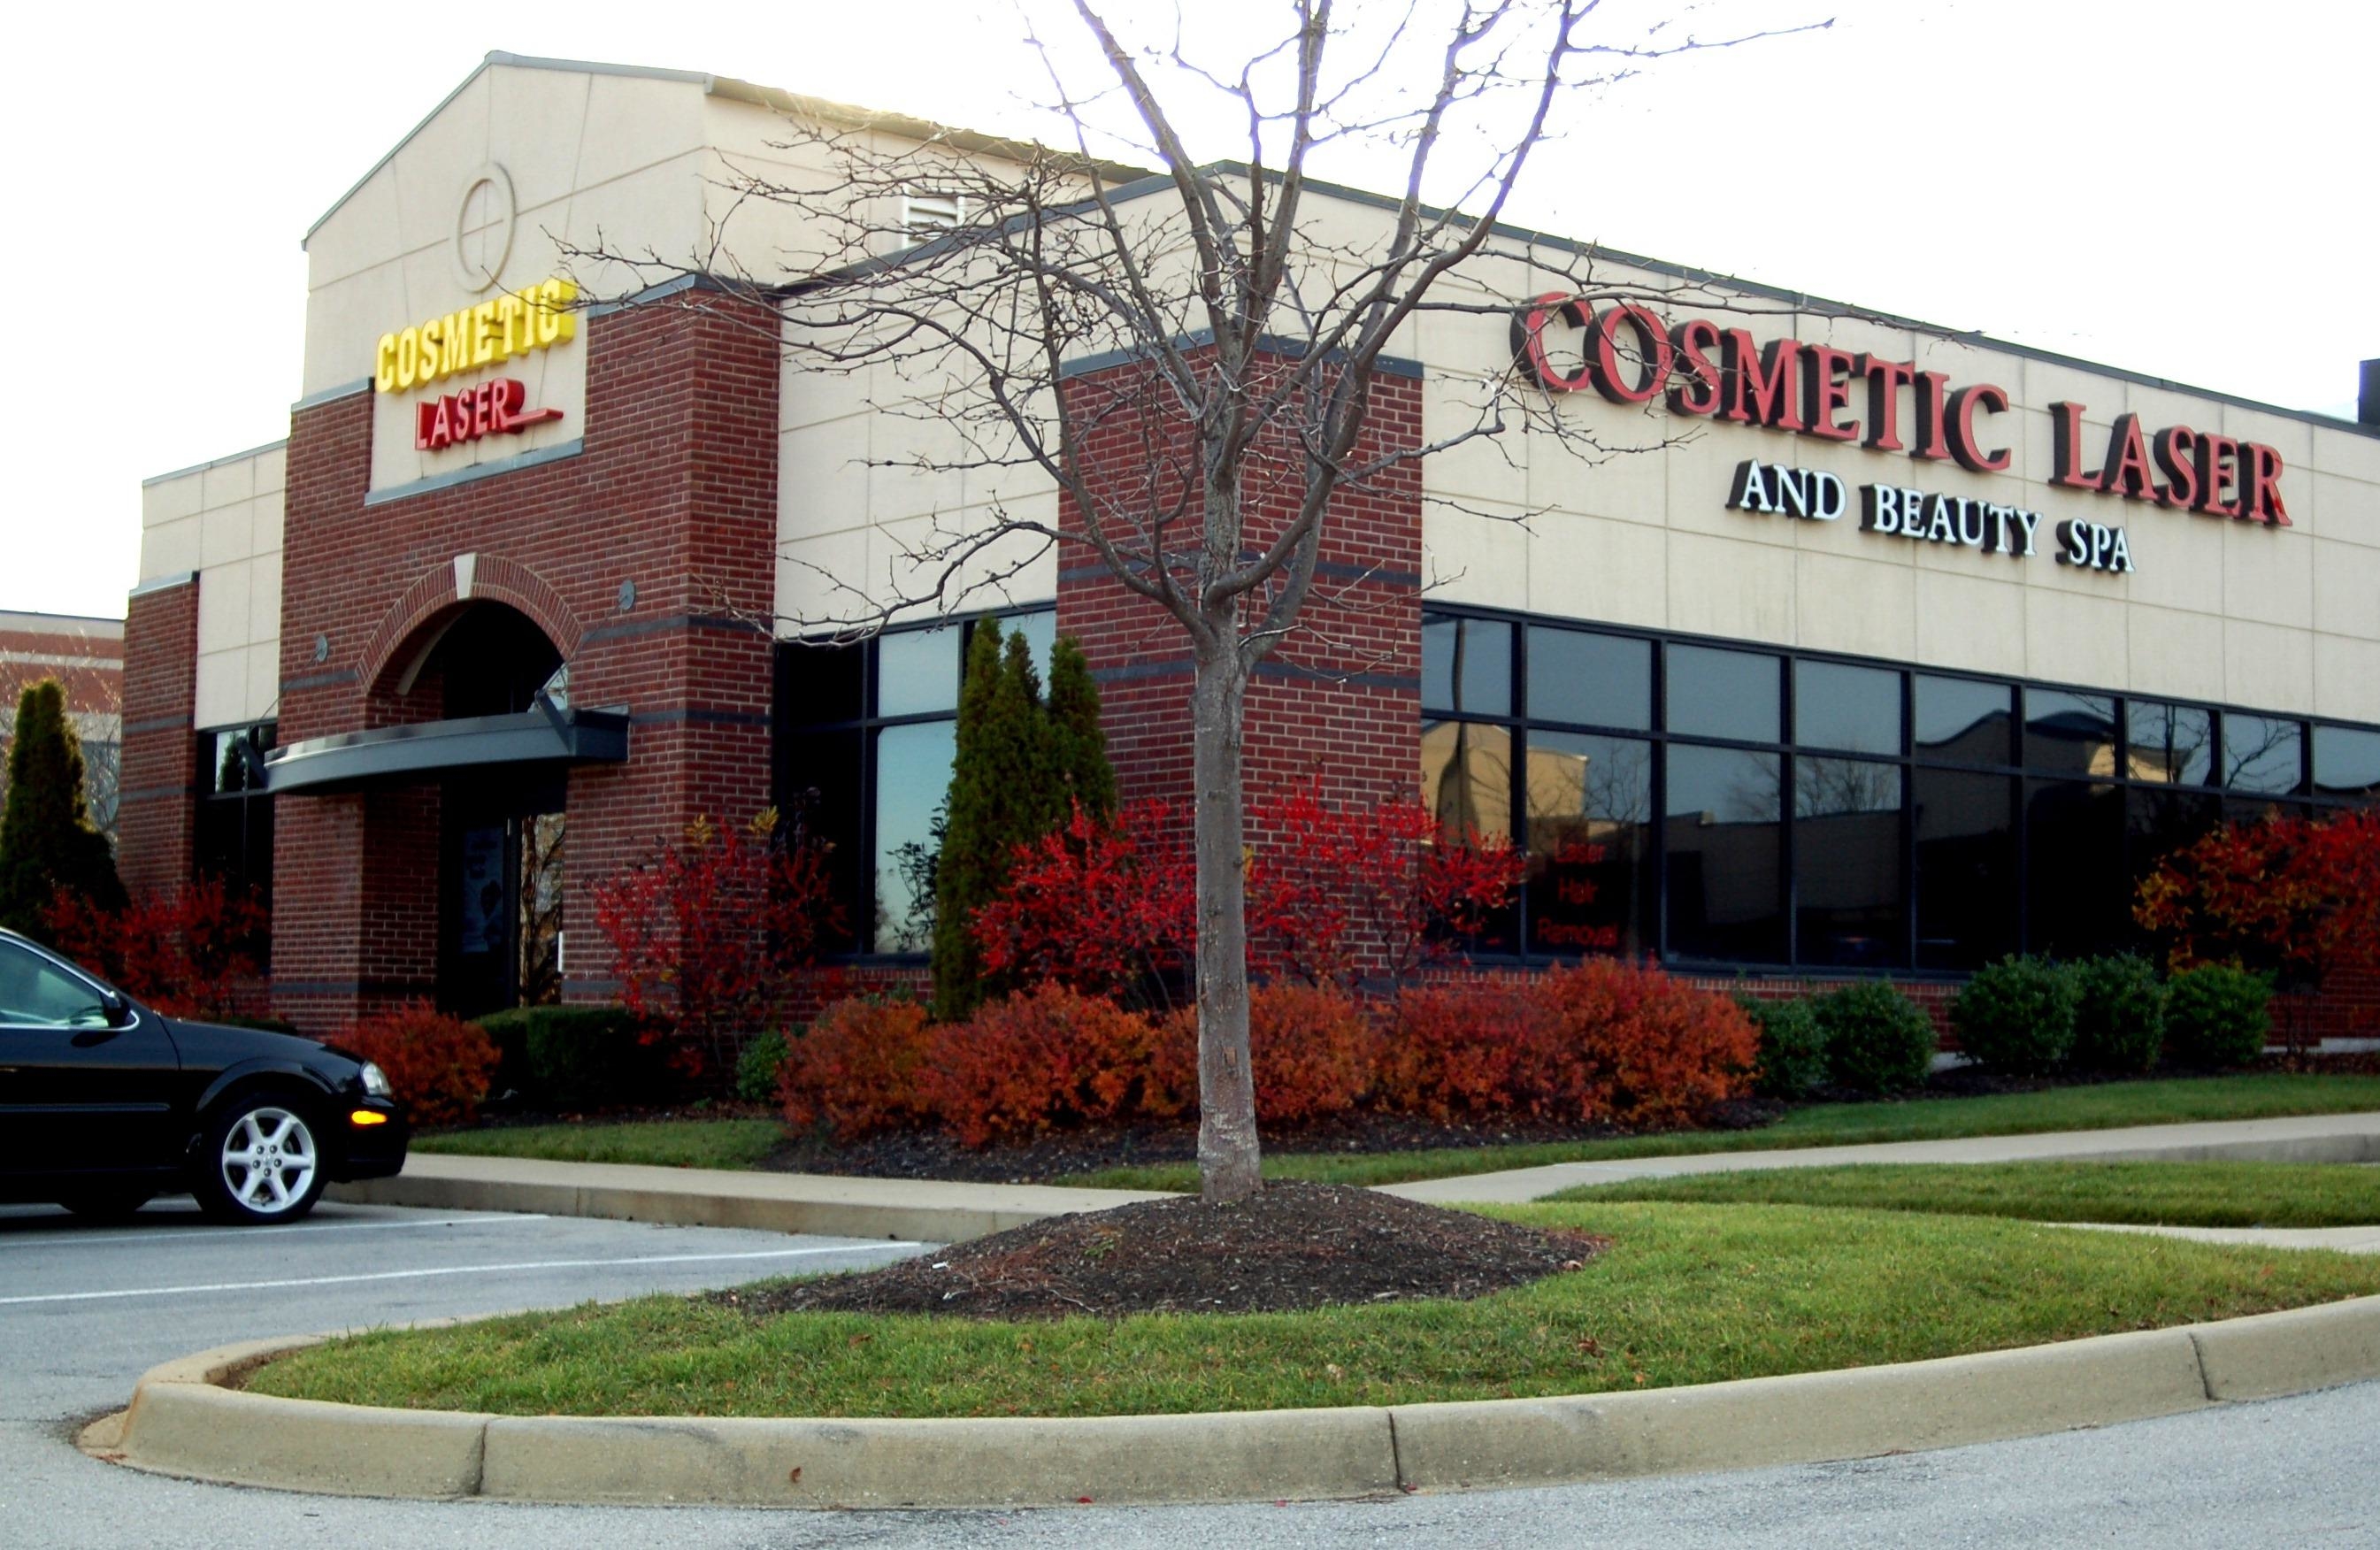 Cosmetic Laser and Beauty Spa - Louisville, KY 40223 - (502)491-6789 | ShowMeLocal.com